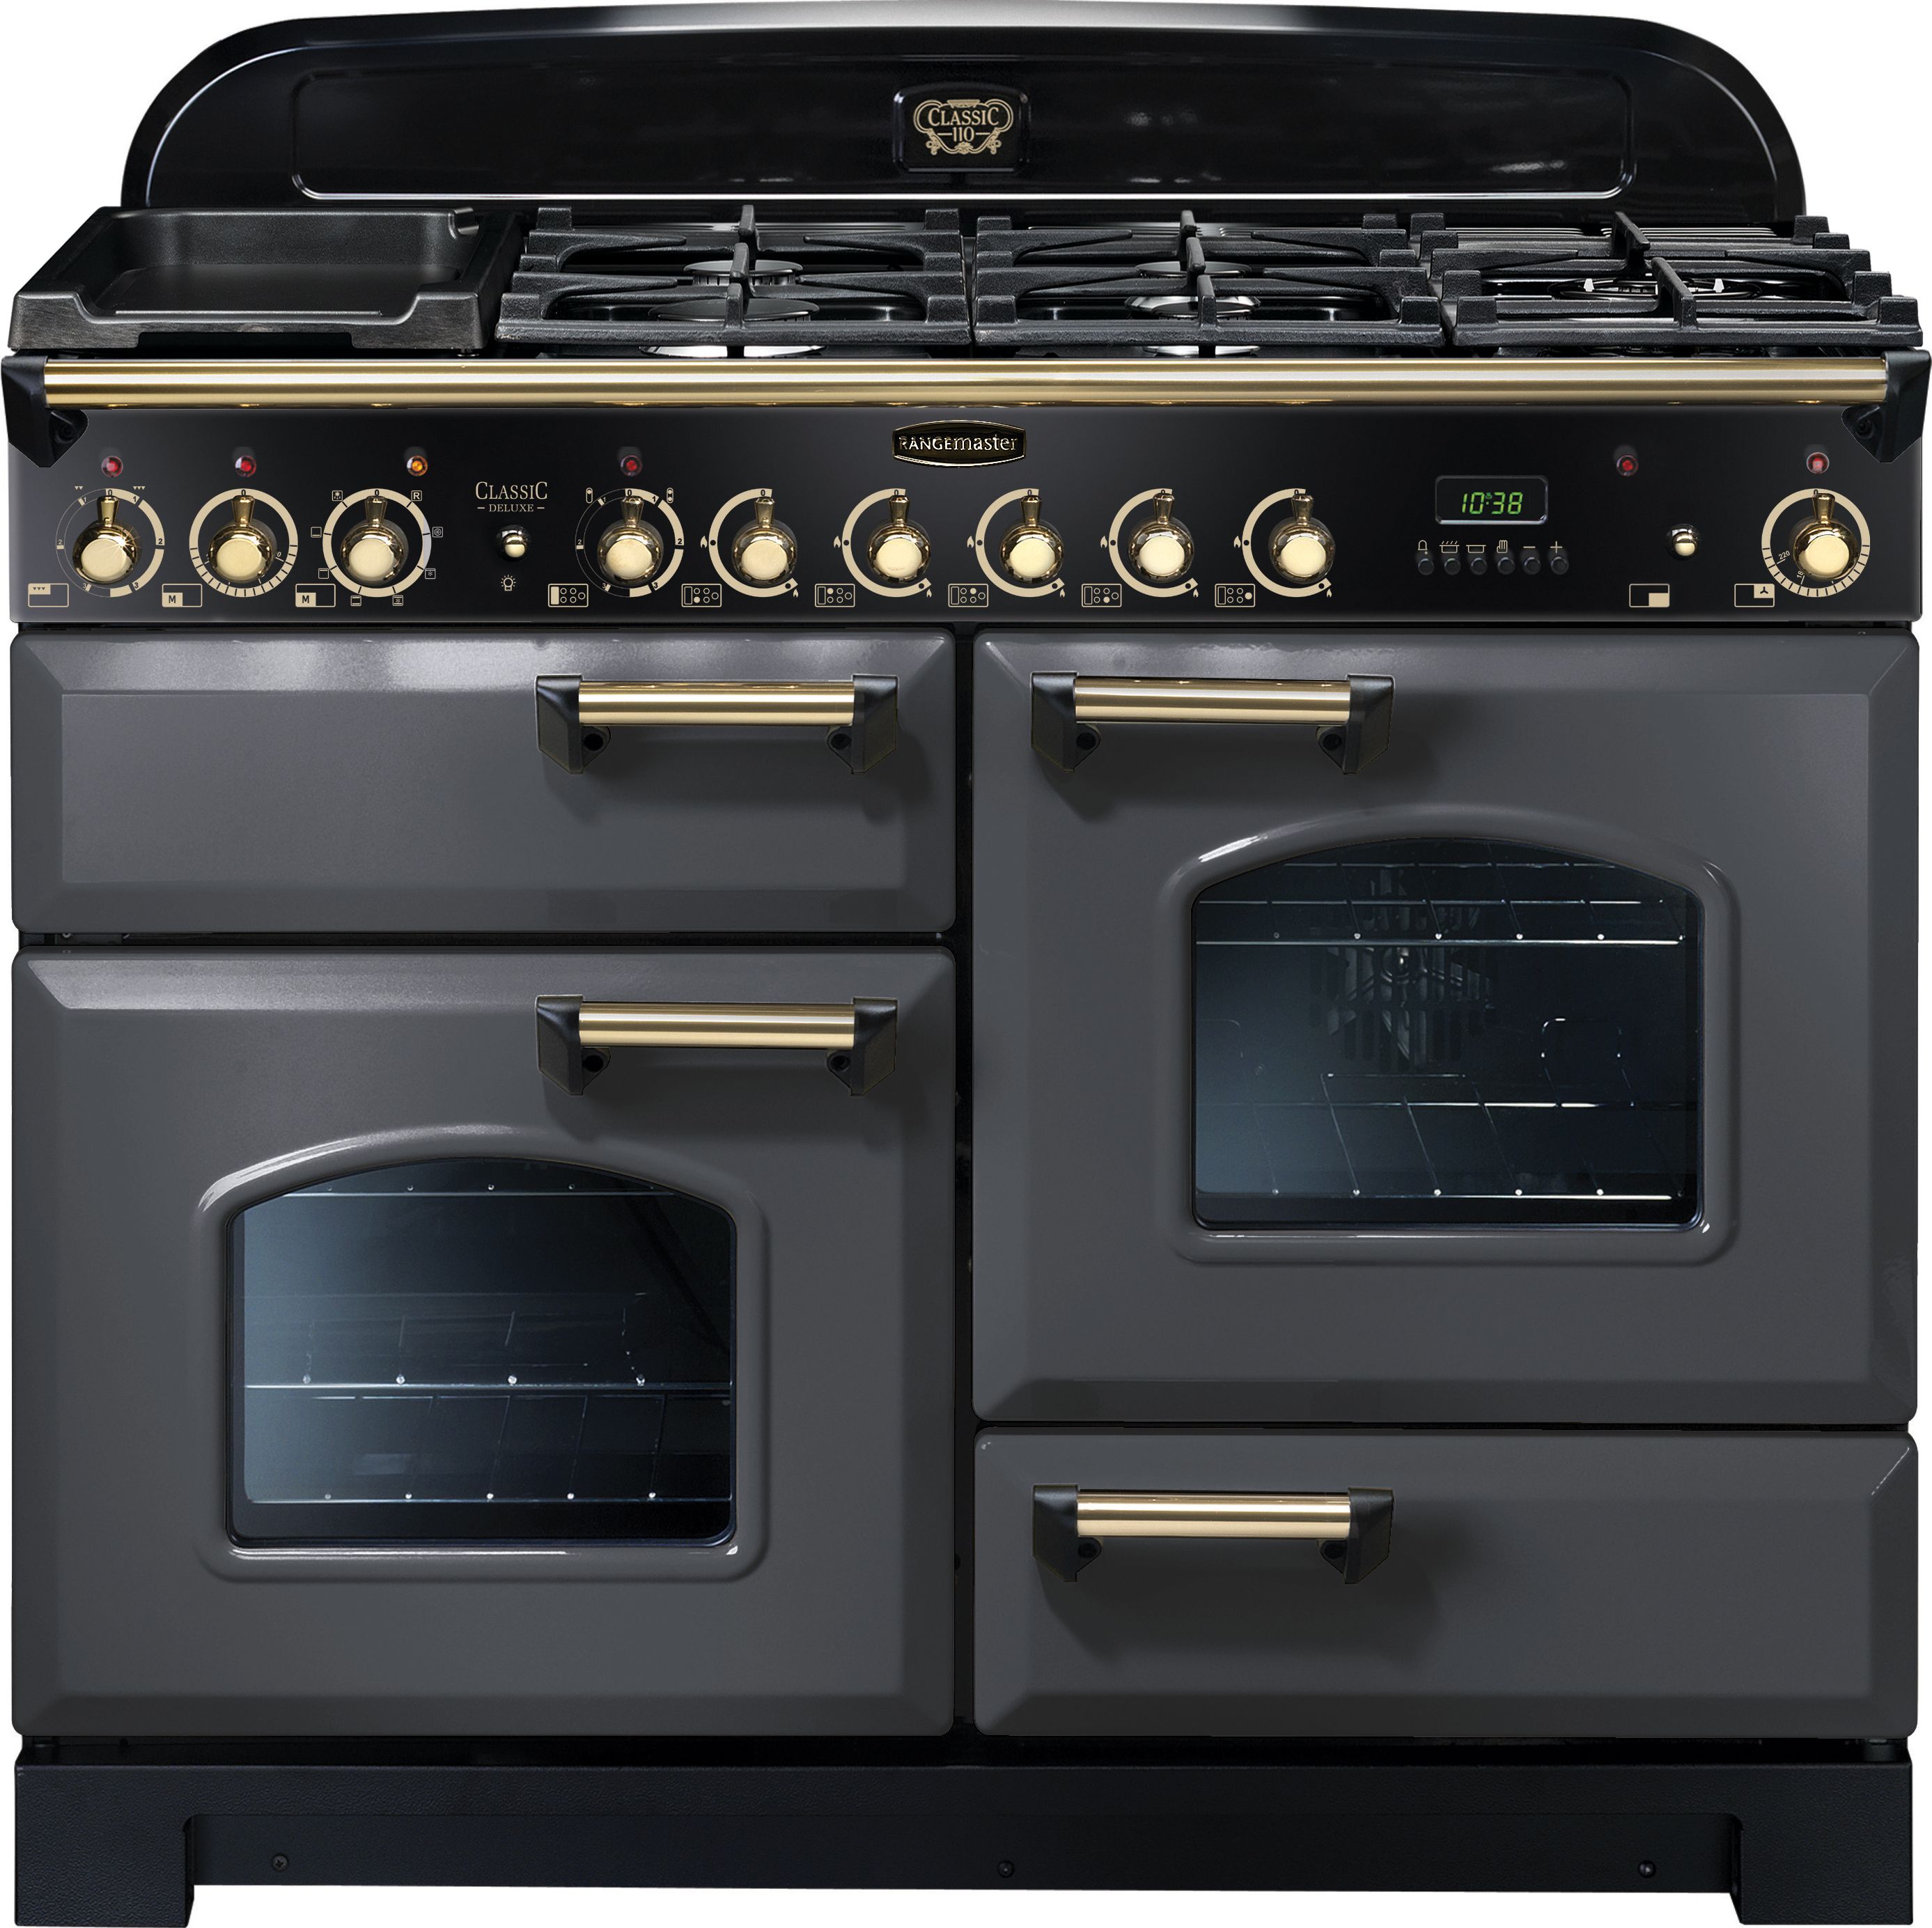 Rangemaster Classic Deluxe CDL110DFFSL/B 110cm Dual Fuel Range Cooker - Slate Grey / Brass - A/A Rated, Grey